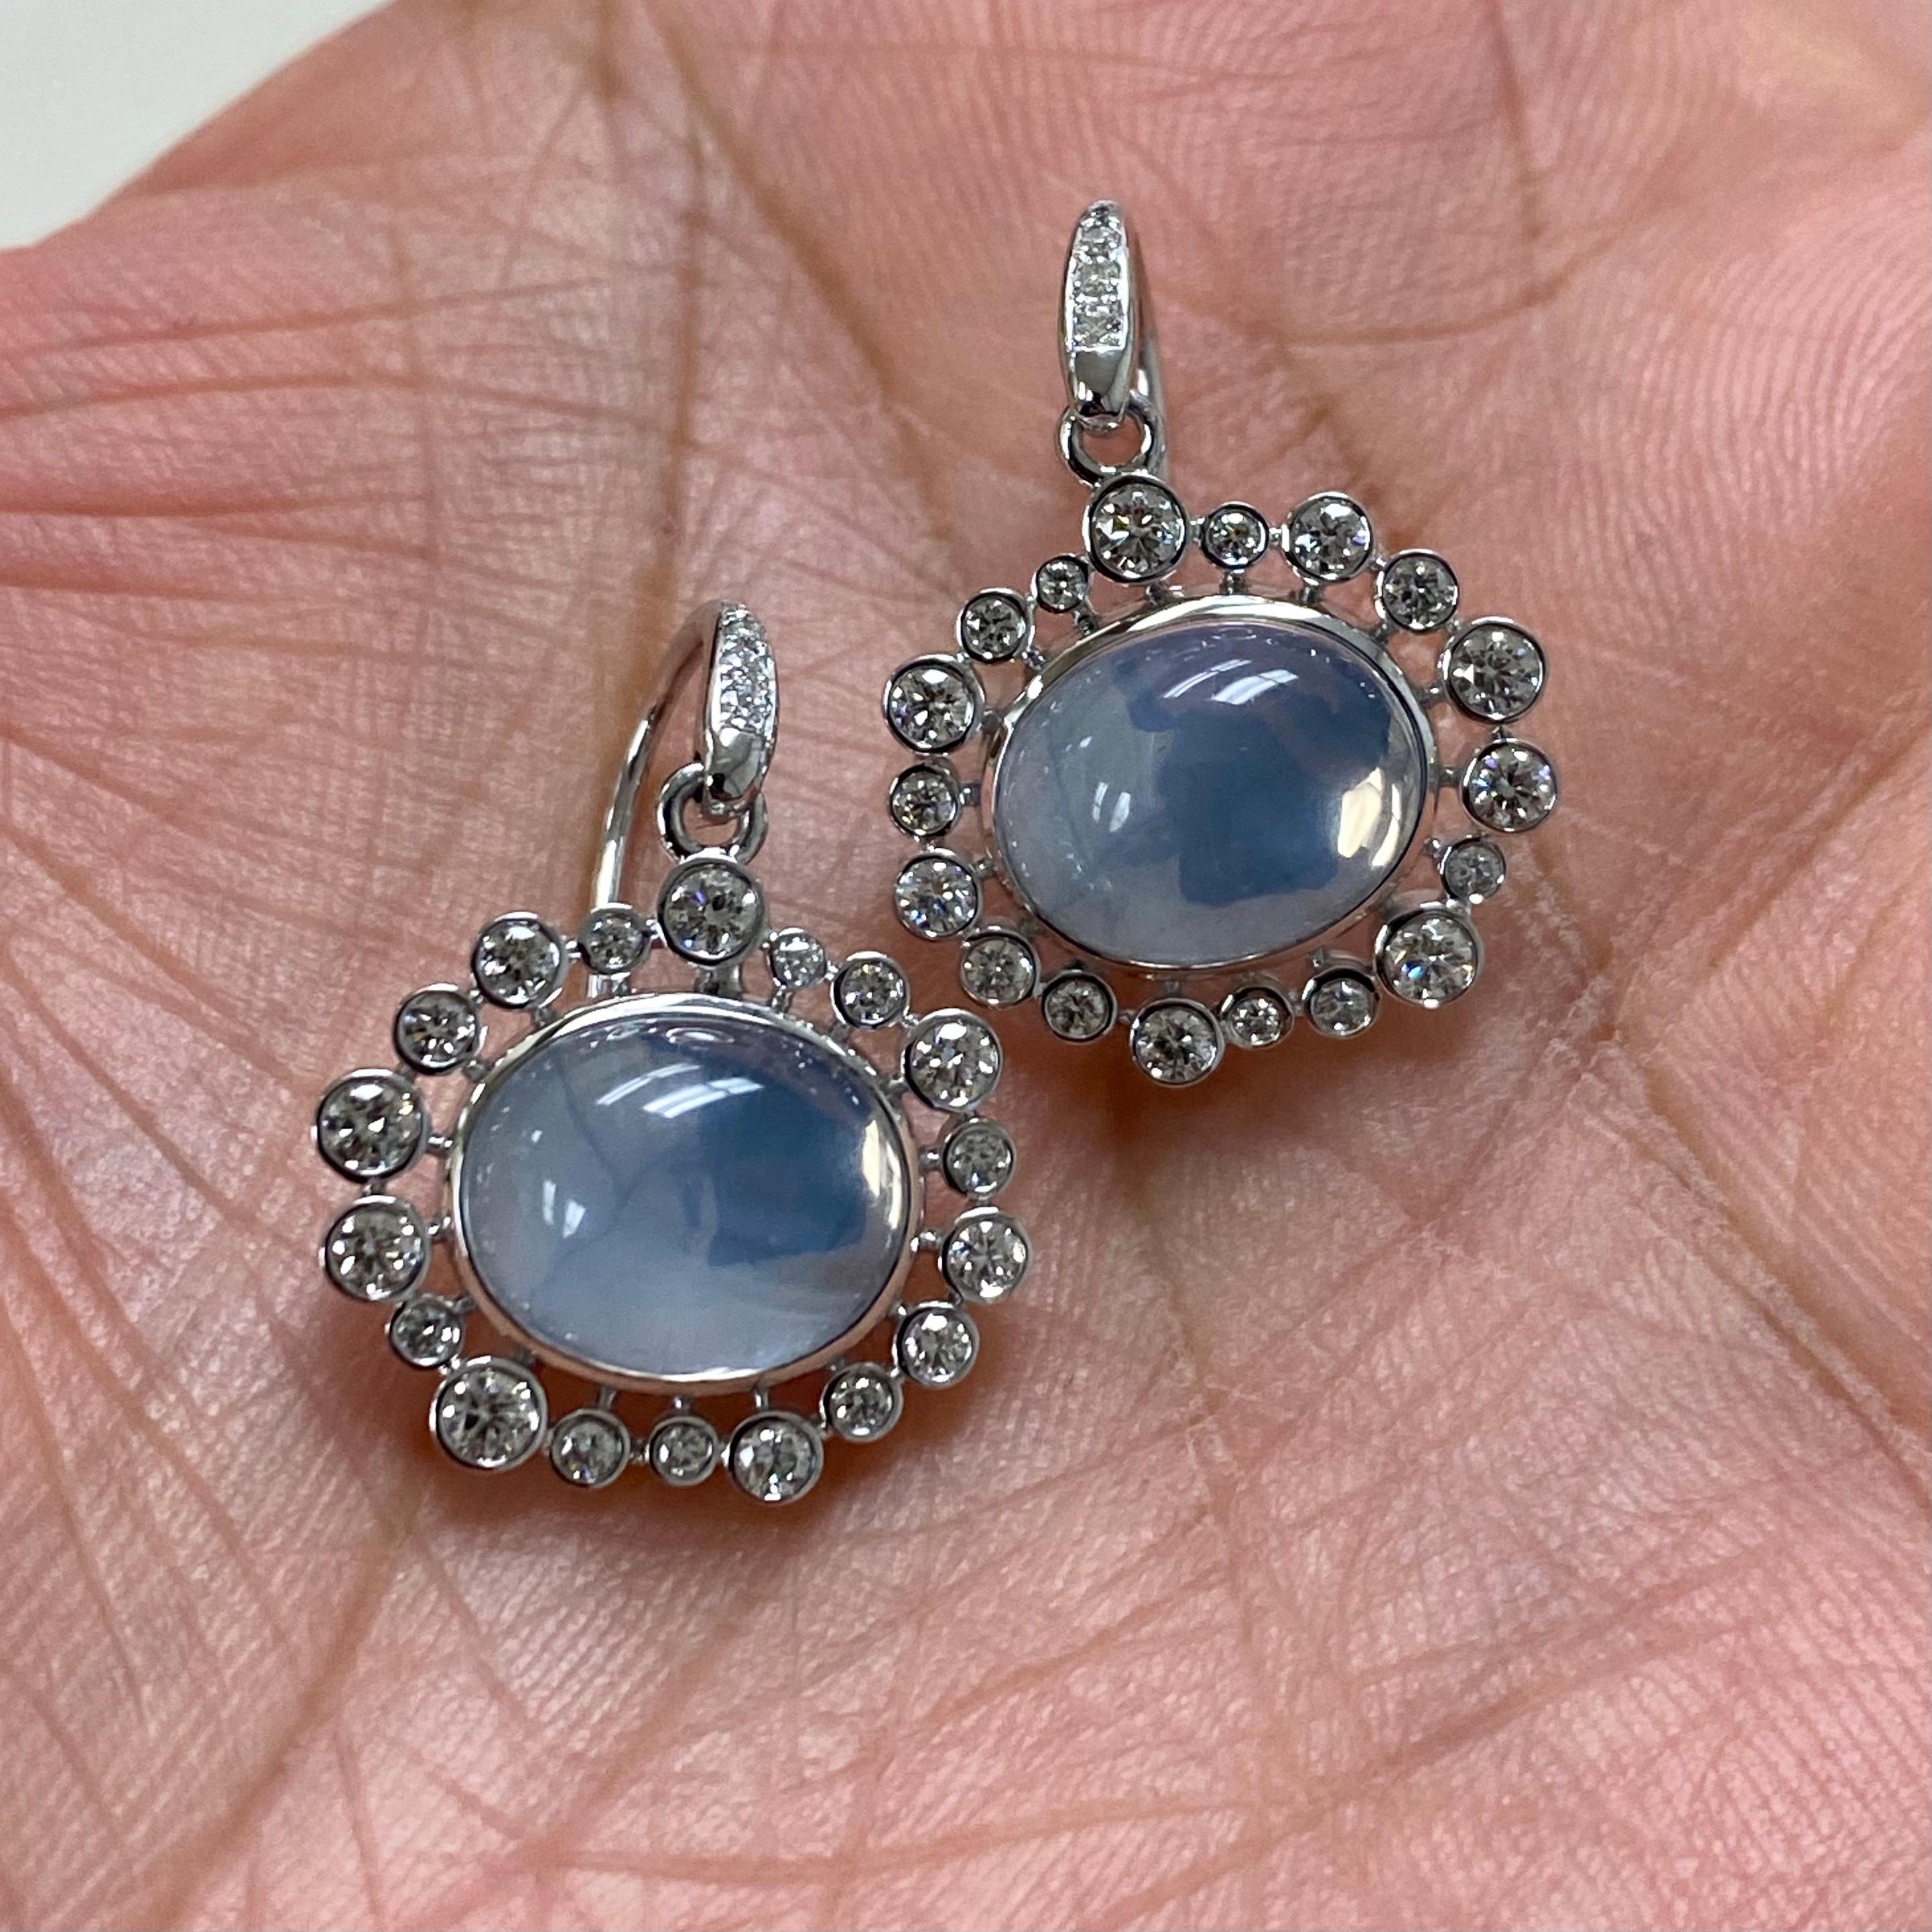 Created in 18 karat white gold
Champagne diamonds 0.80 carat approx.
Moon quartz 7.50 carats approx.
French wire for pierced ears
Limited Edition


About the Designers

Drawing inspiration from little things, Dharmesh & Namrata Kothari have created